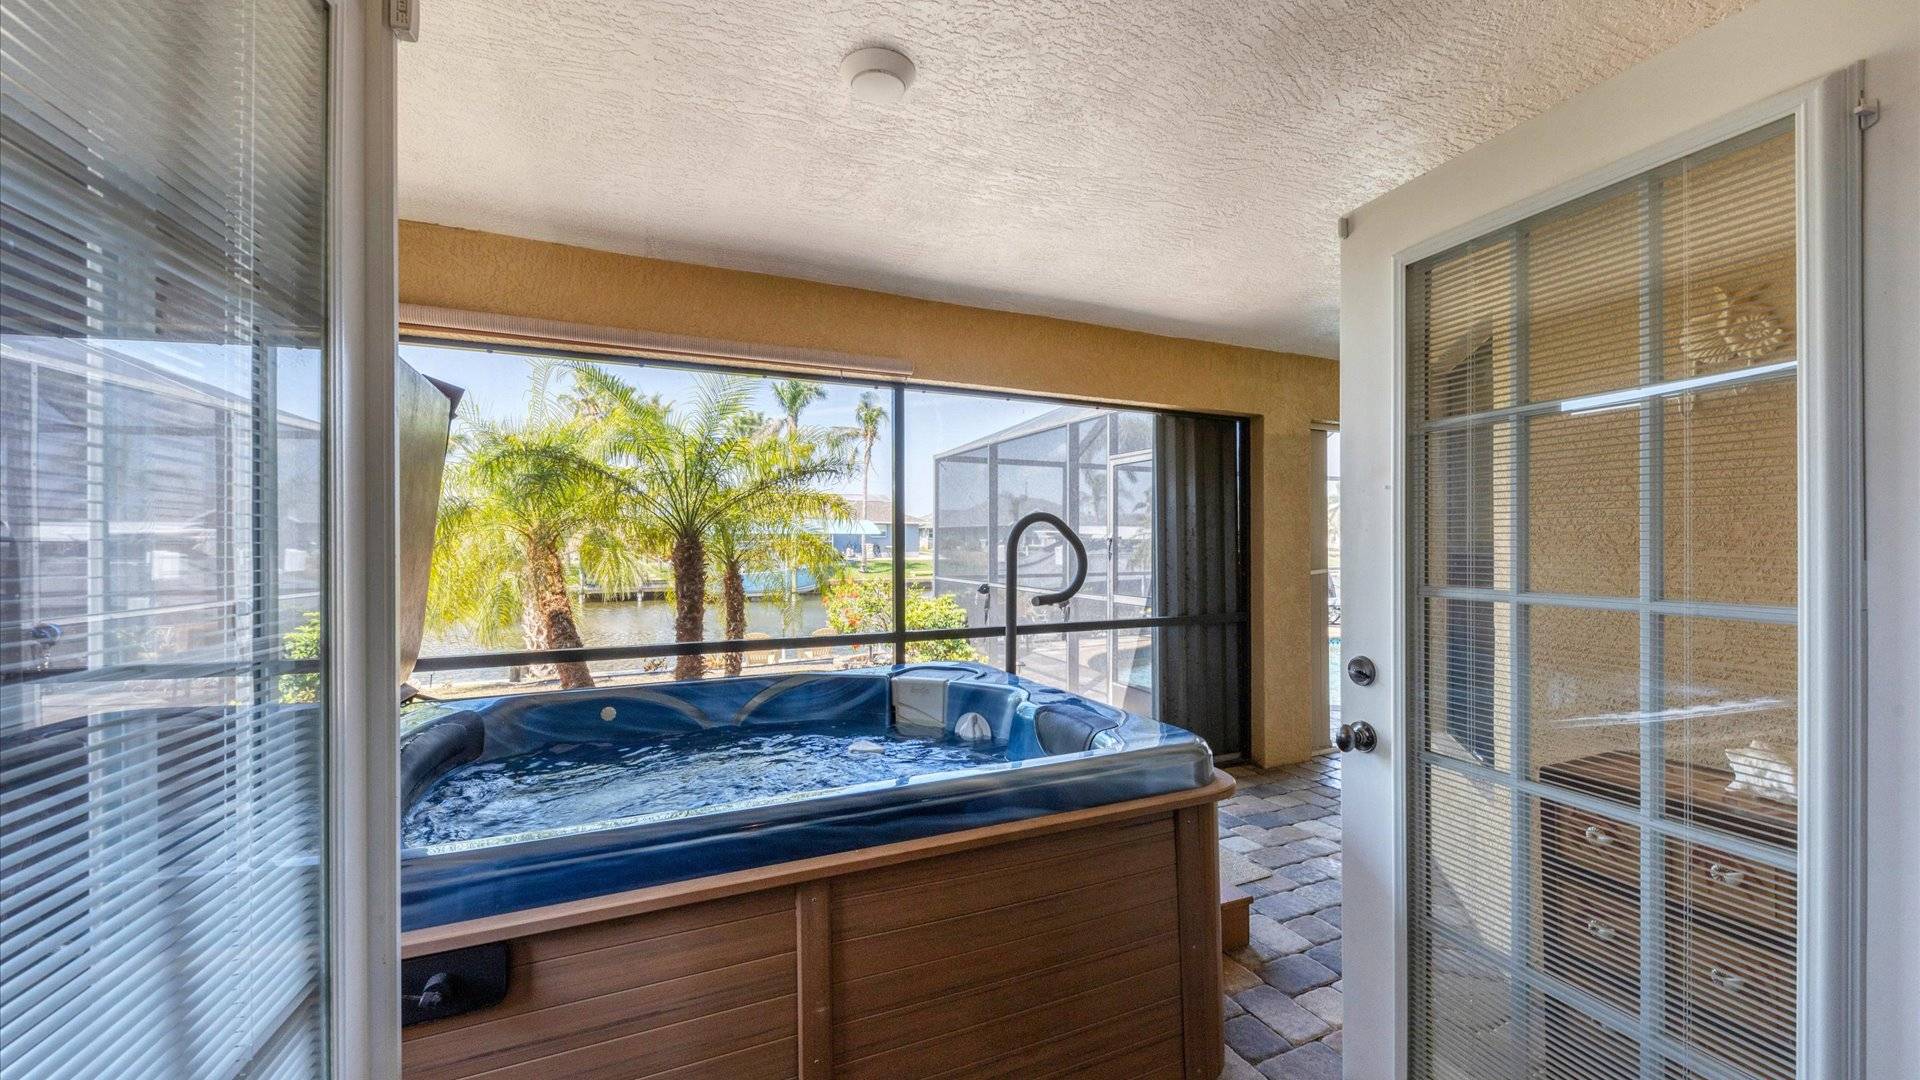 French doors open from master bedroom to lanai and stand-alone hot tub